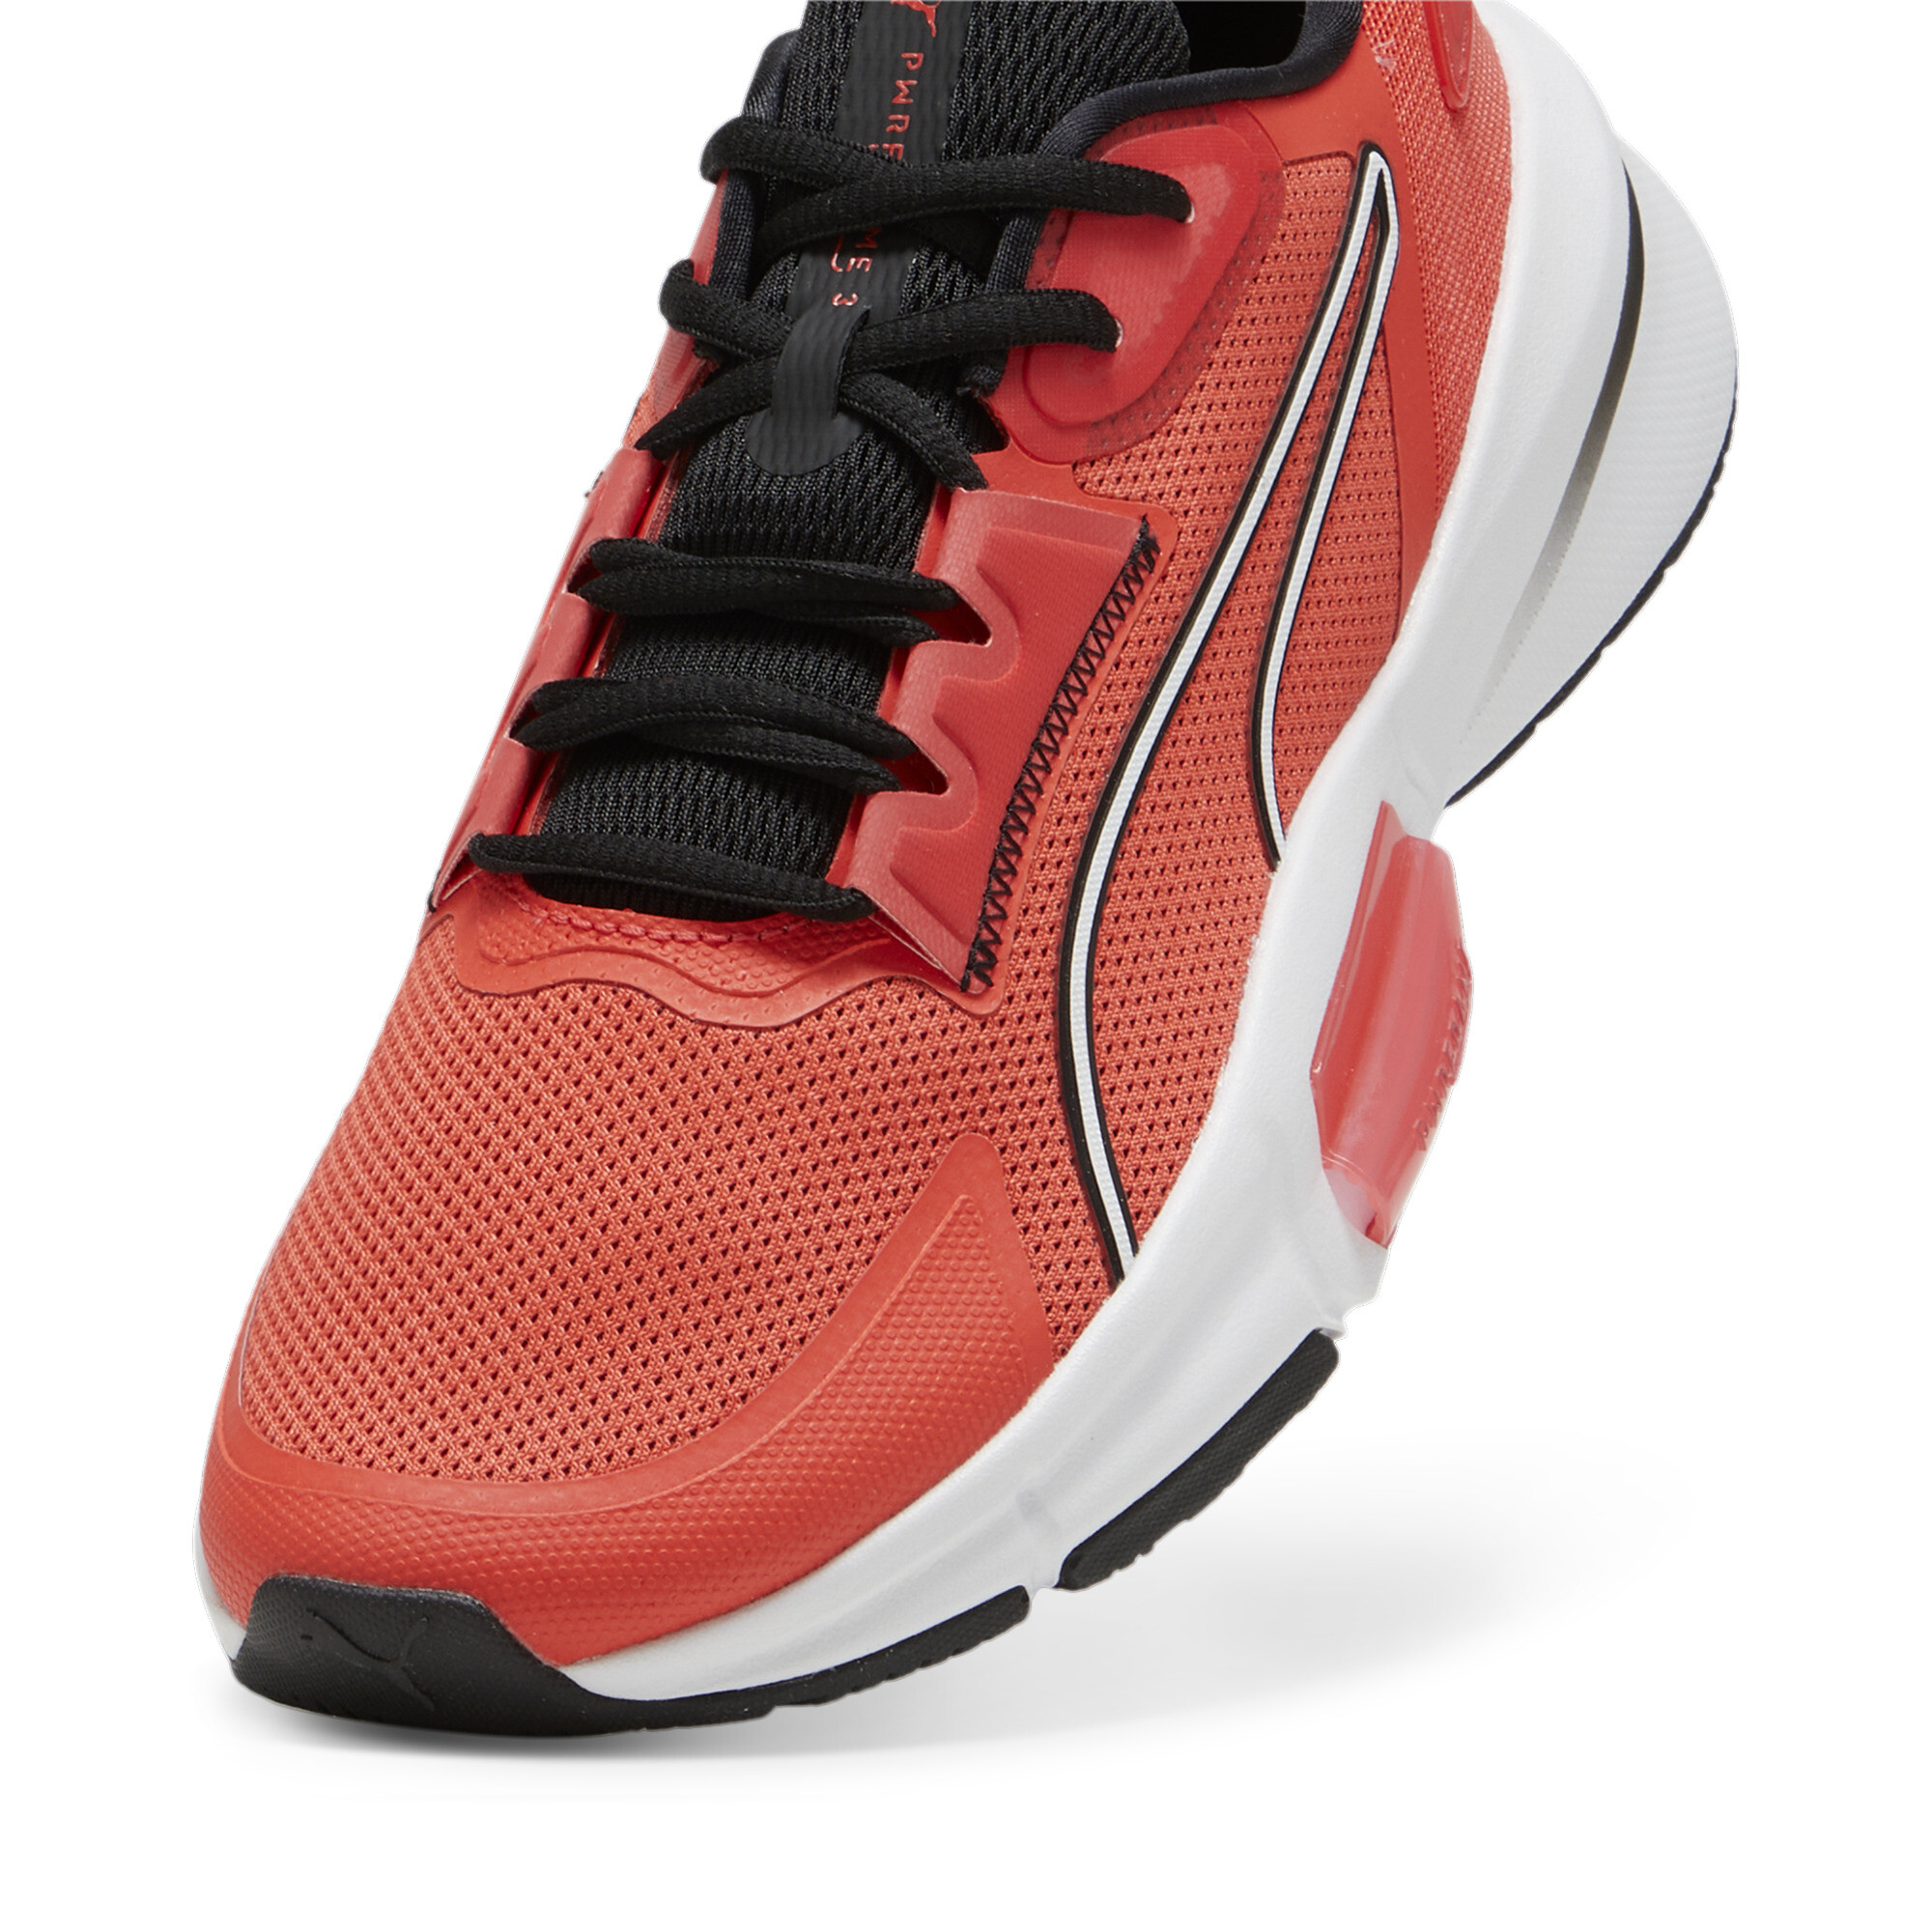 Men's PUMA PWRFrame TR 3 Training Shoes In Red, Size EU 40.5